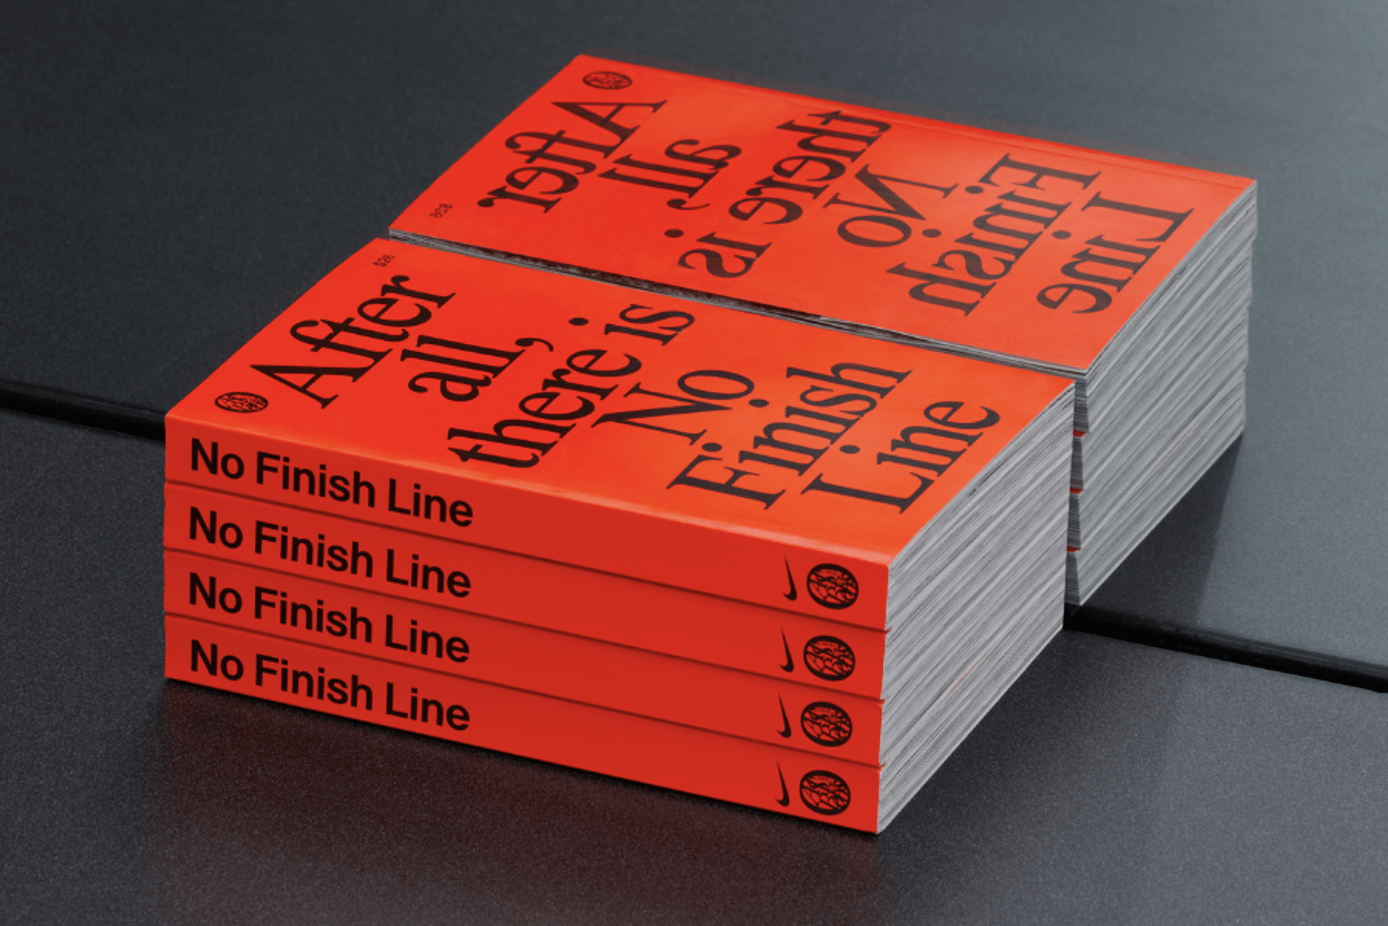 Nike release a book to inspire better design